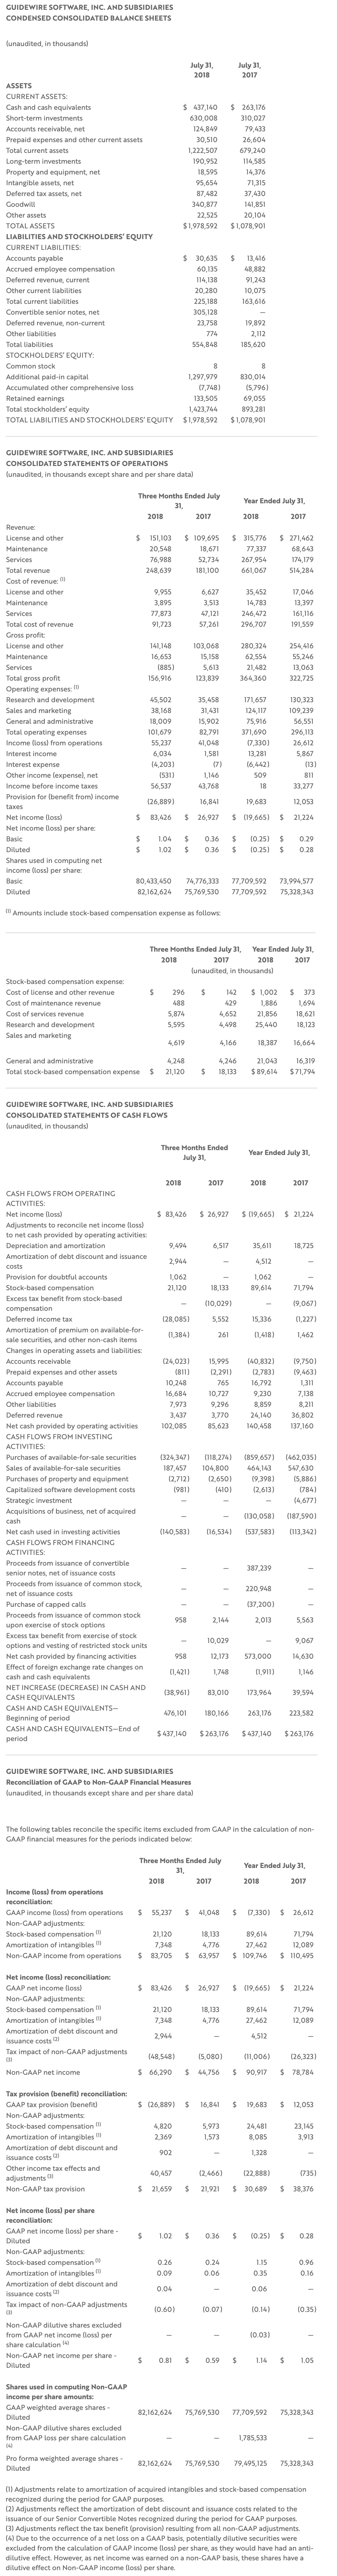 Fourth Fiscal Quarter and Fiscal Year 2018 Tab 3